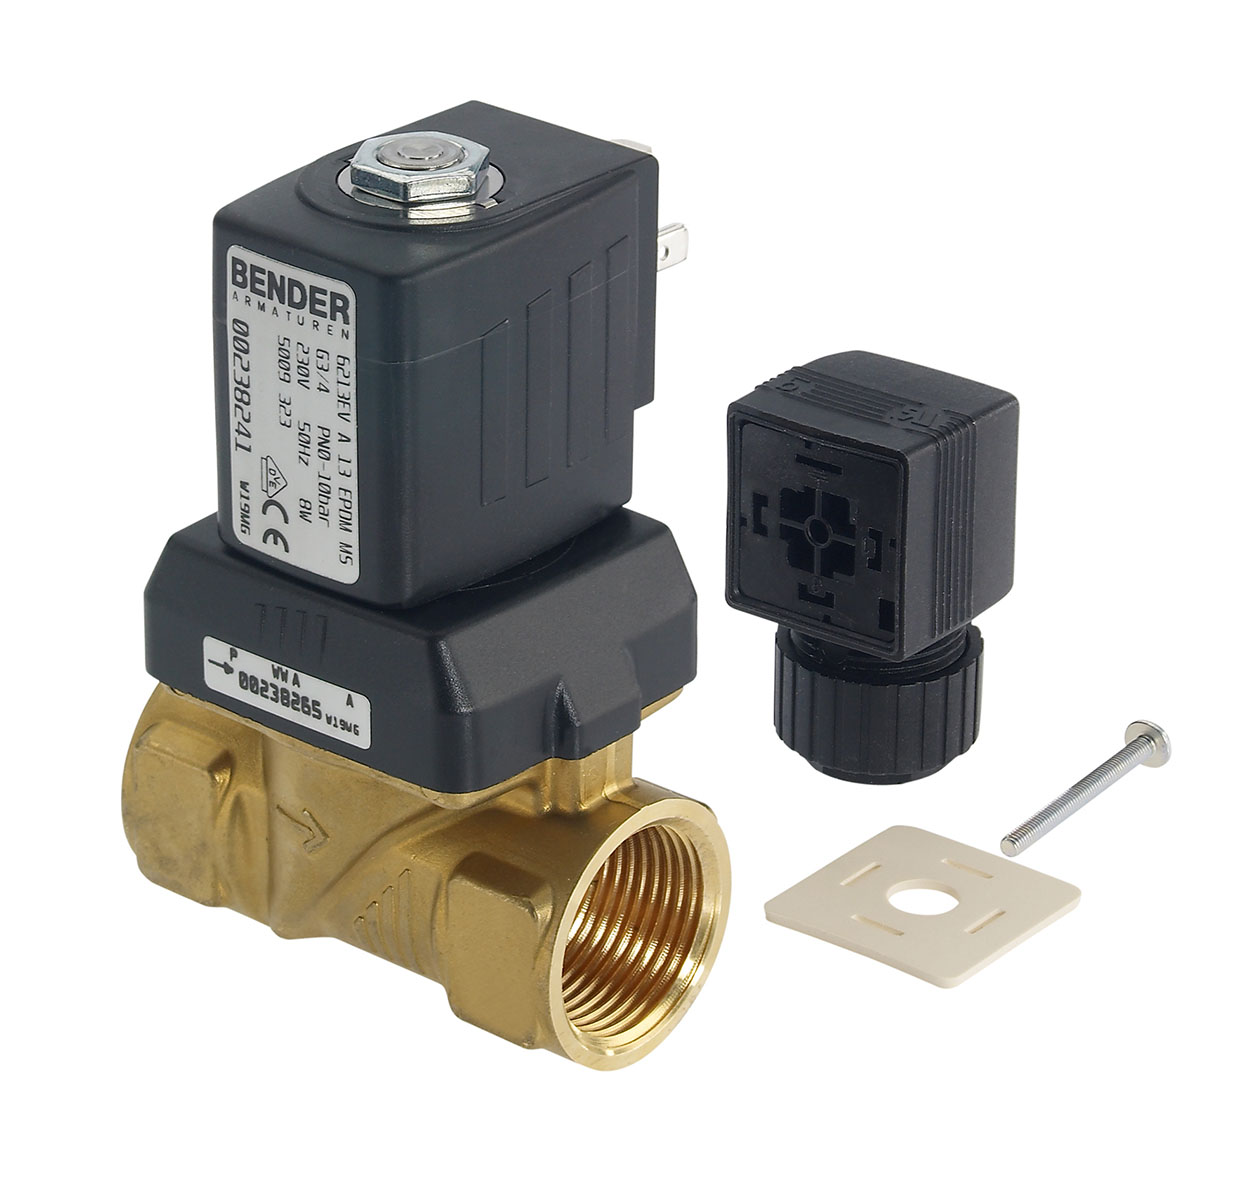 5009305 - 2/2 way solenoidvalve normally closed for fluids Type 1; female thread